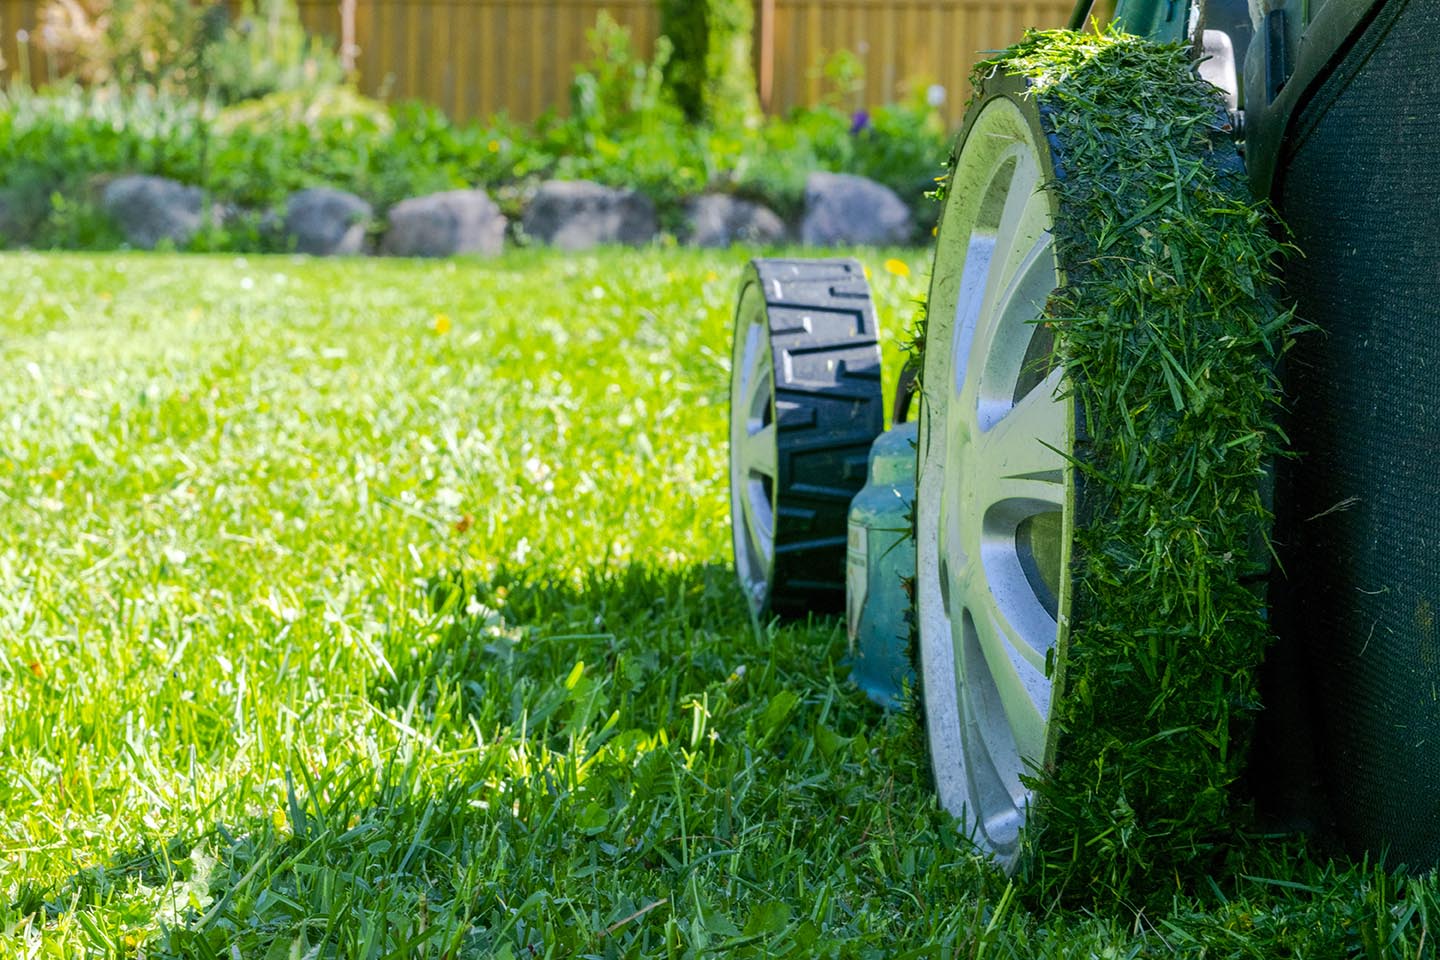 Lawn Mowing and Gardening Services for Your Every Need!